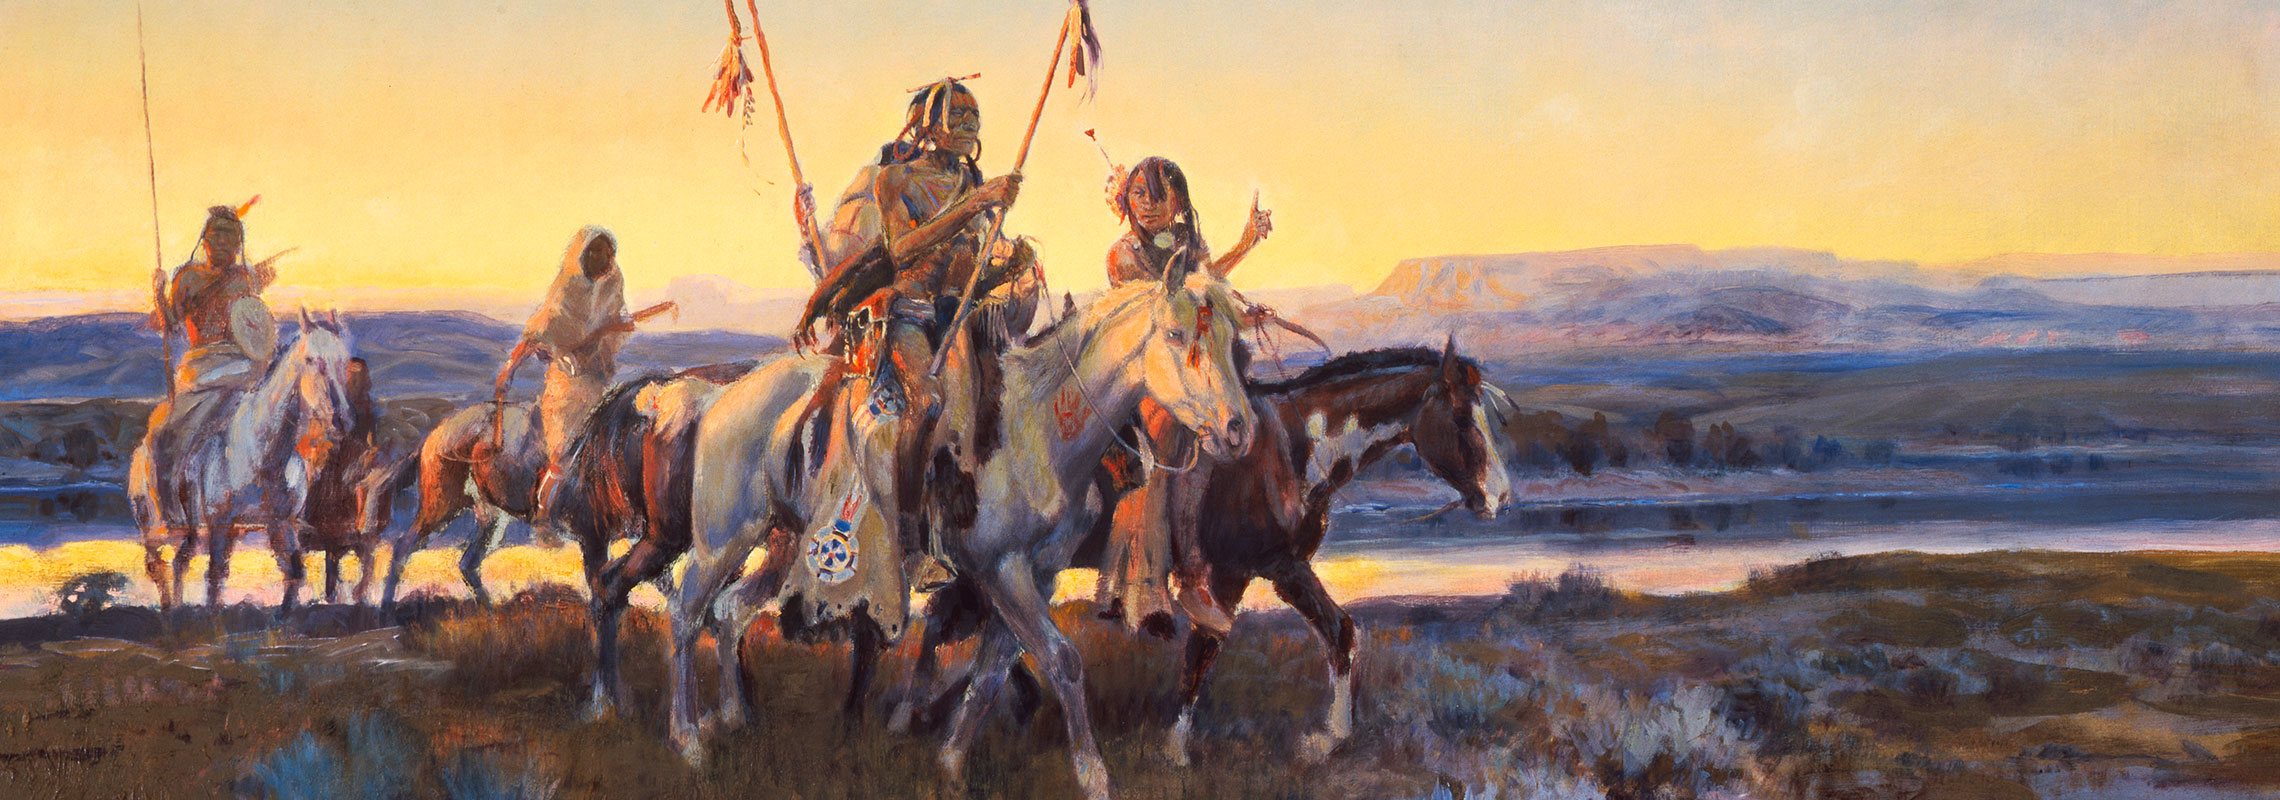 The American West Reimagined: Gems from the Coeur d’Alene Art Auction